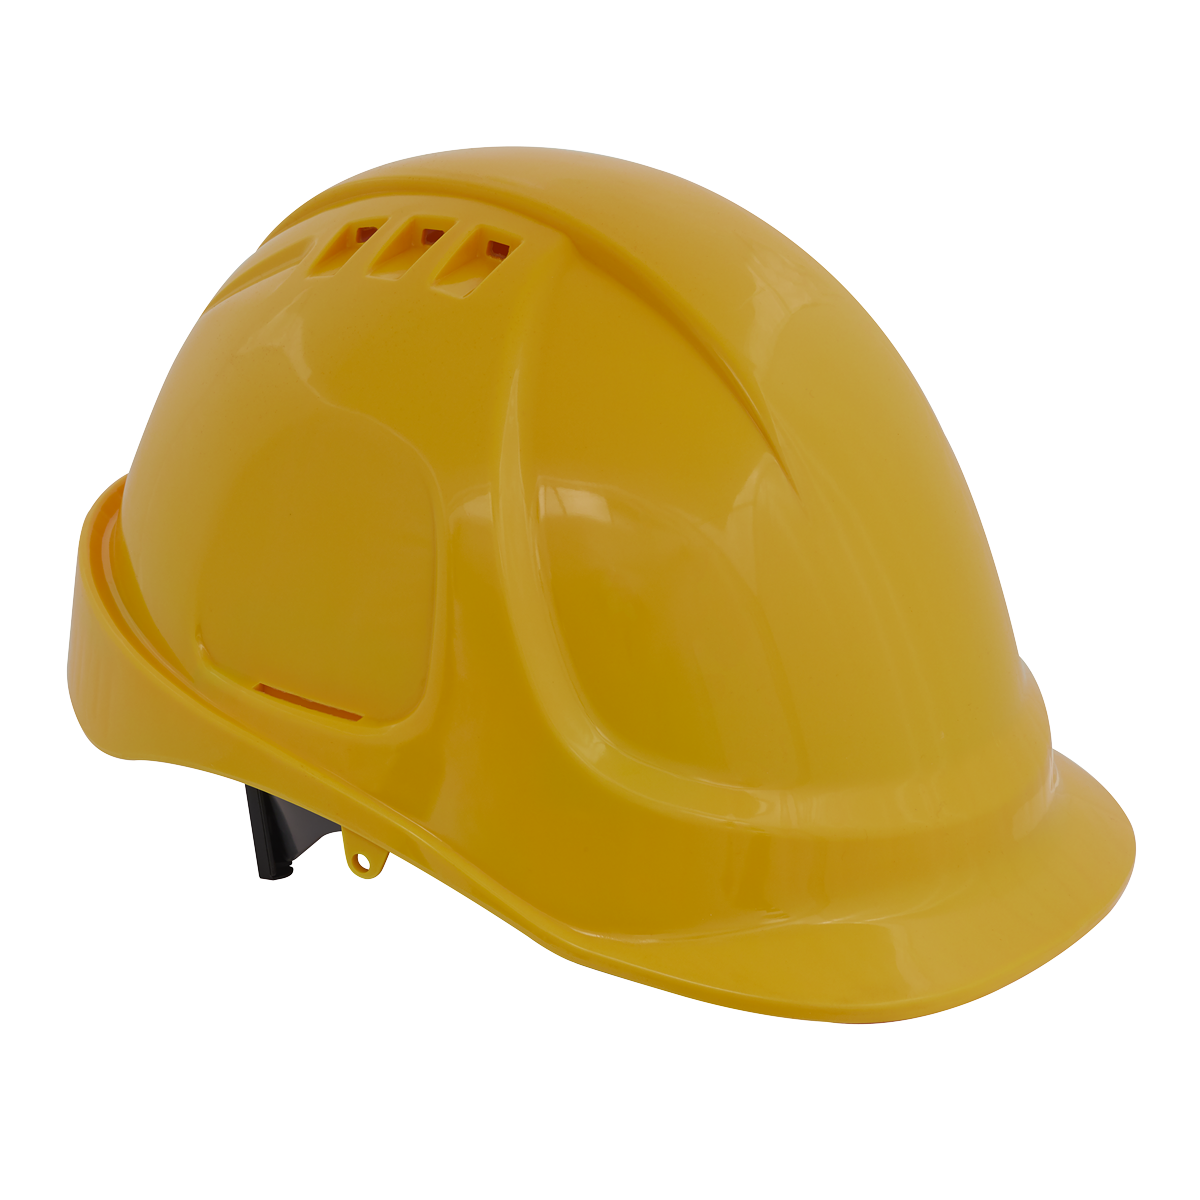 Sealey Safety Helmet - Vented (Yellow)